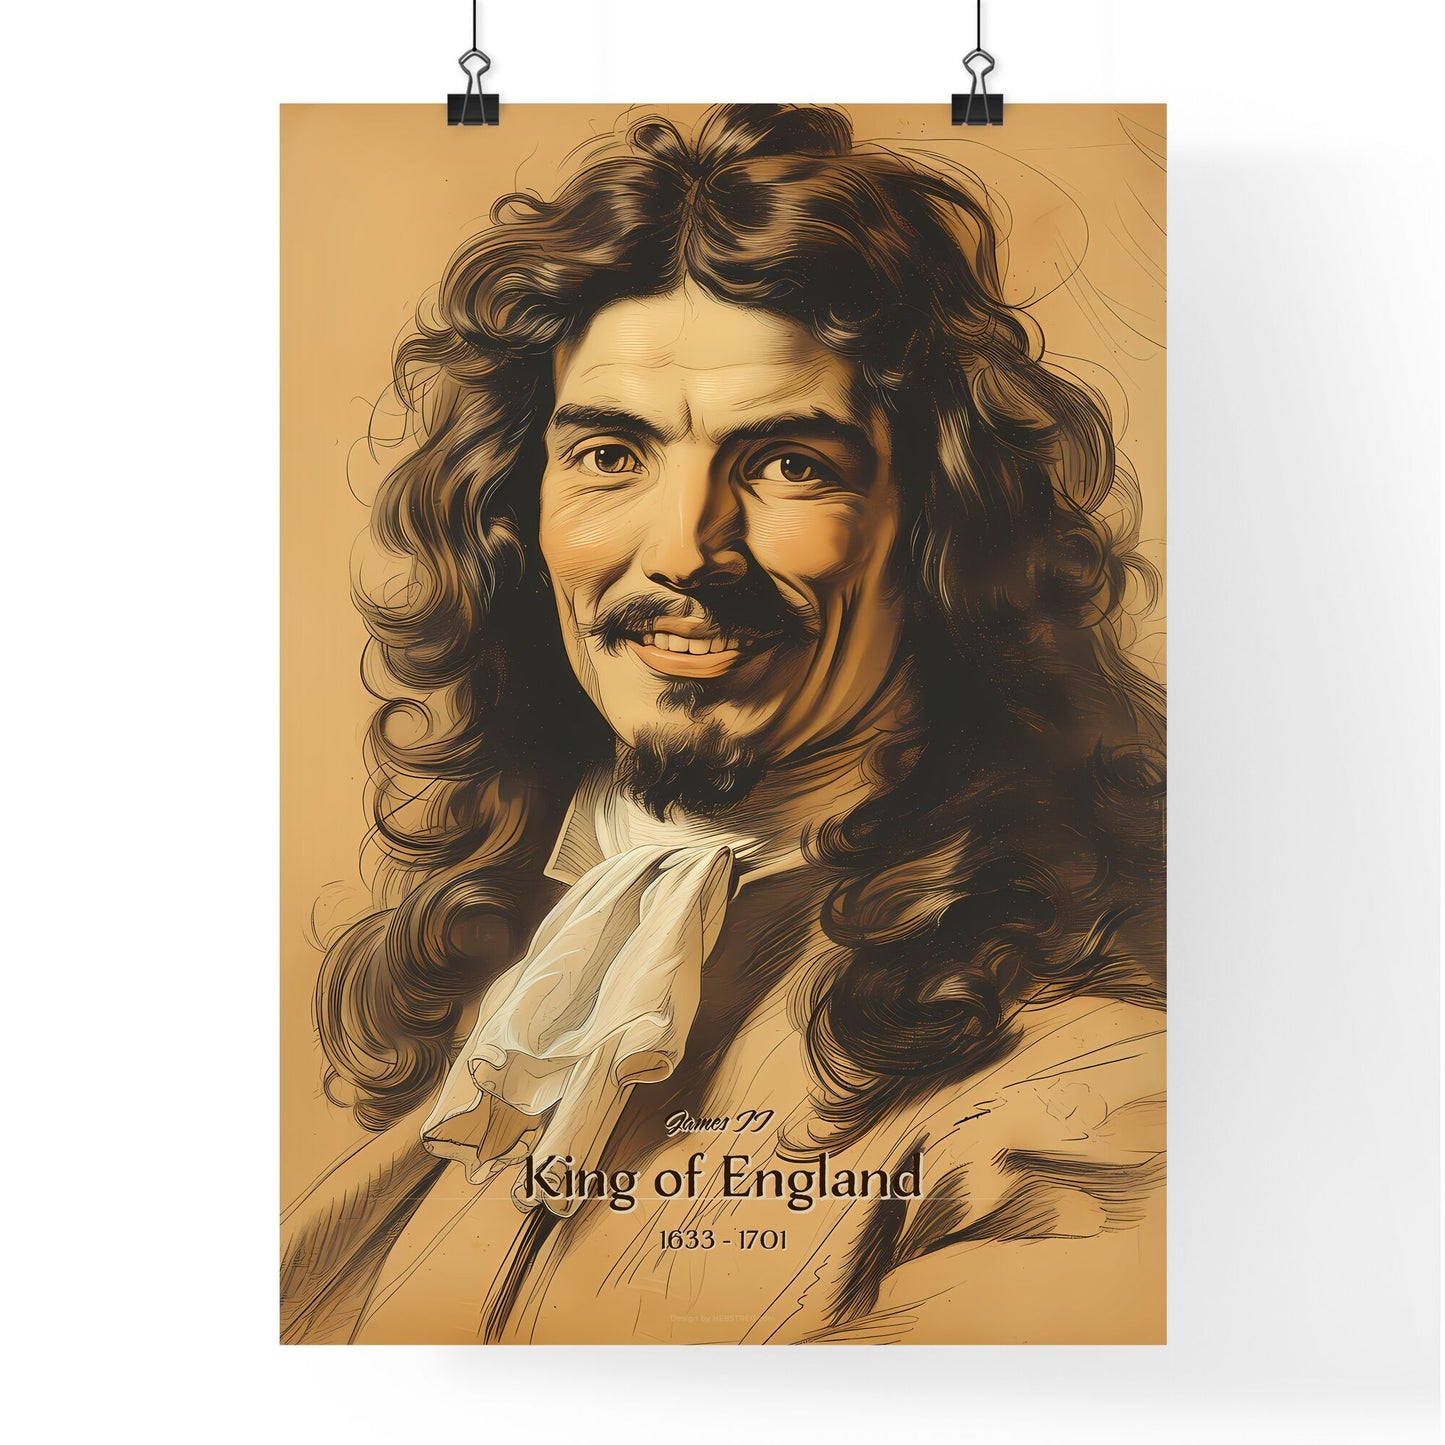 James II, King of England, 1633 - 1701, A Poster of a man with long curly hair and mustache Default Title